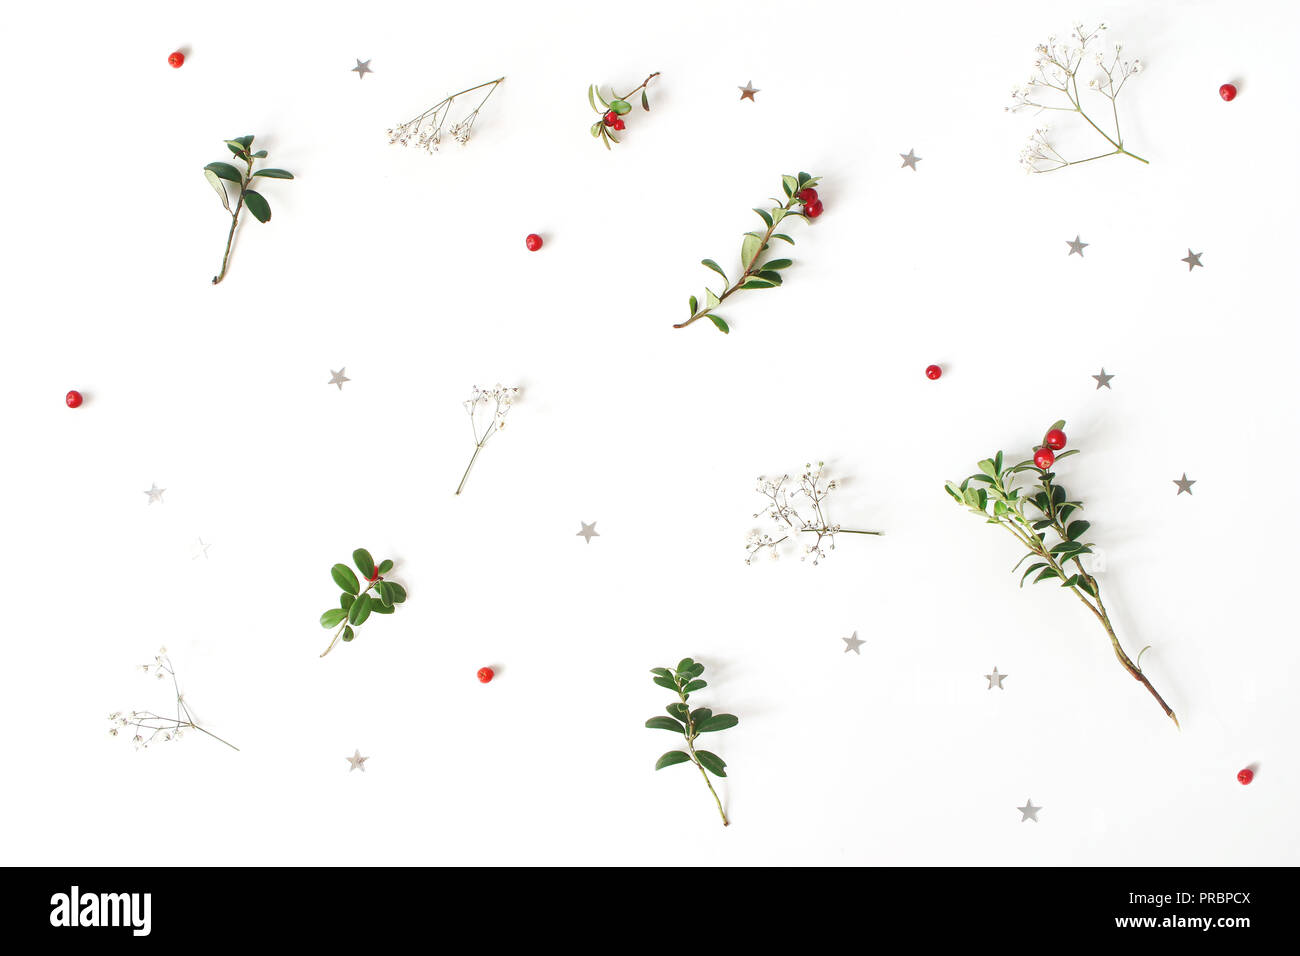 Christmas floral pattern. Winter composition of red cranberry branches, baby's breath flowers and silver confetti stars on white table. Festive background. Flat lay, top view. Stock Photo